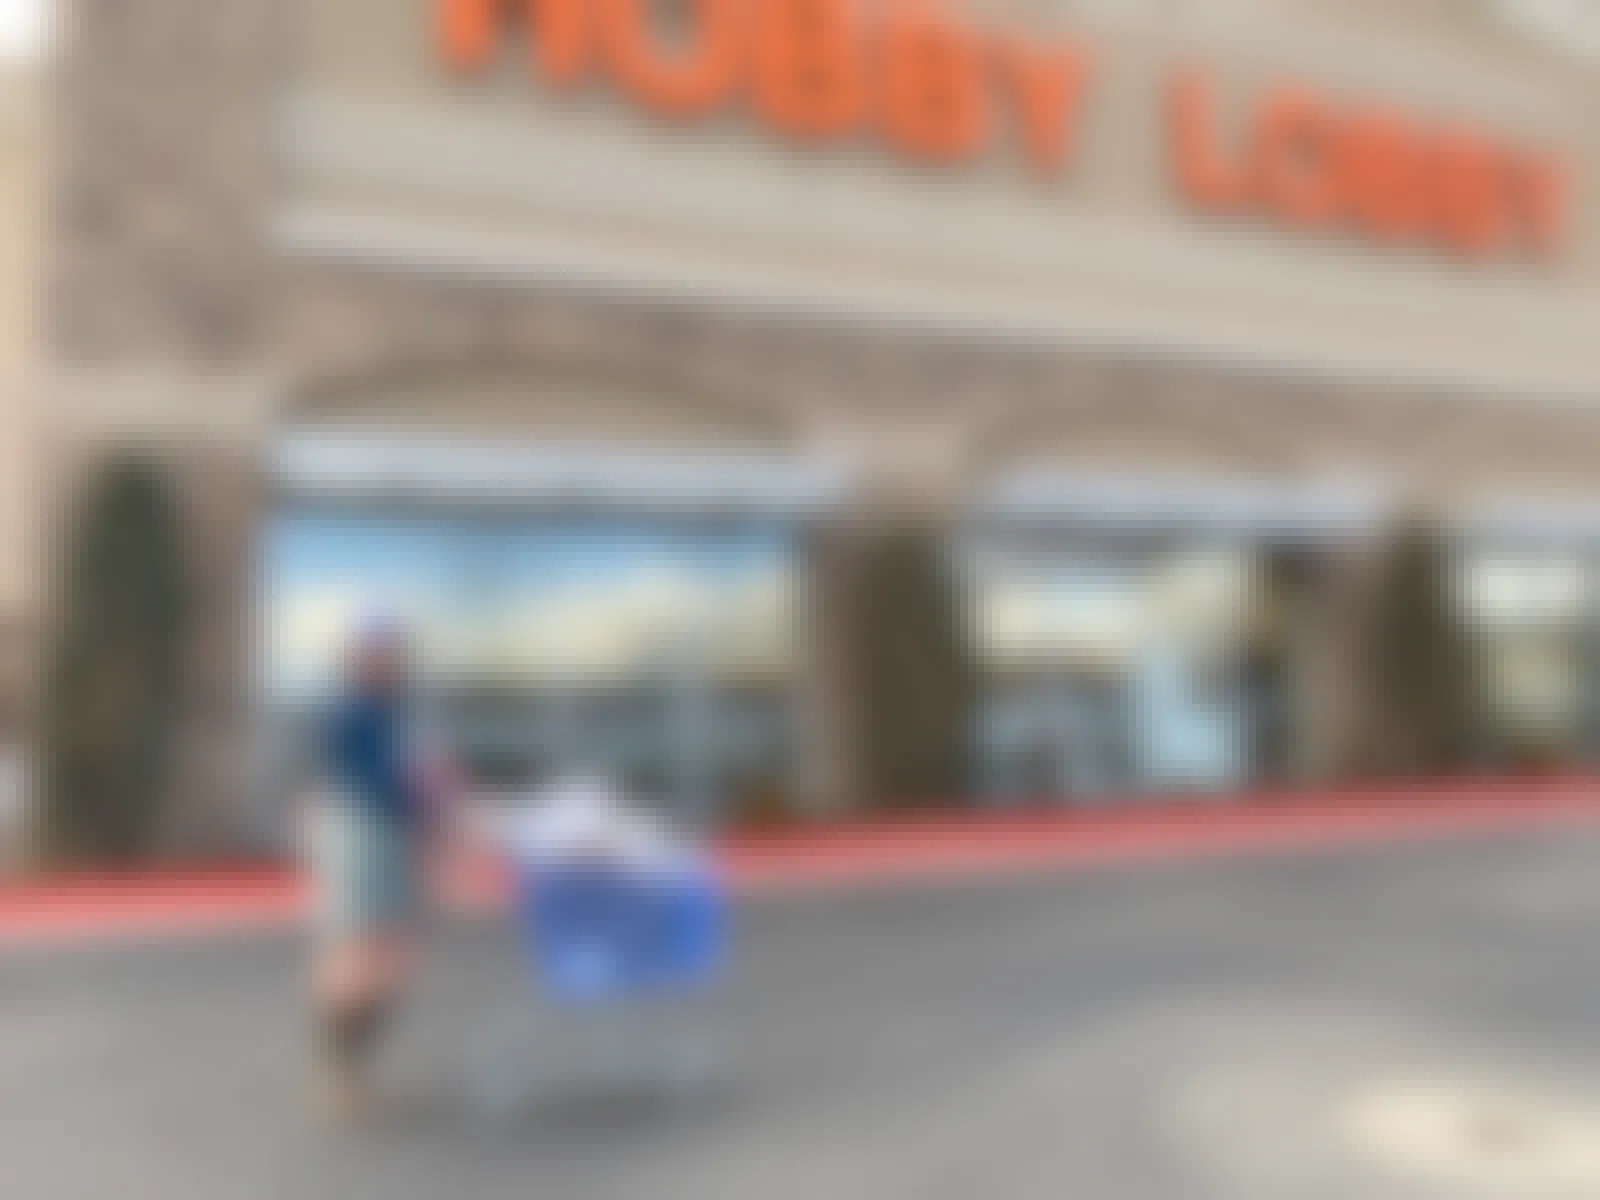 A woman pushing a cart in front of a Hobby Lobby store.